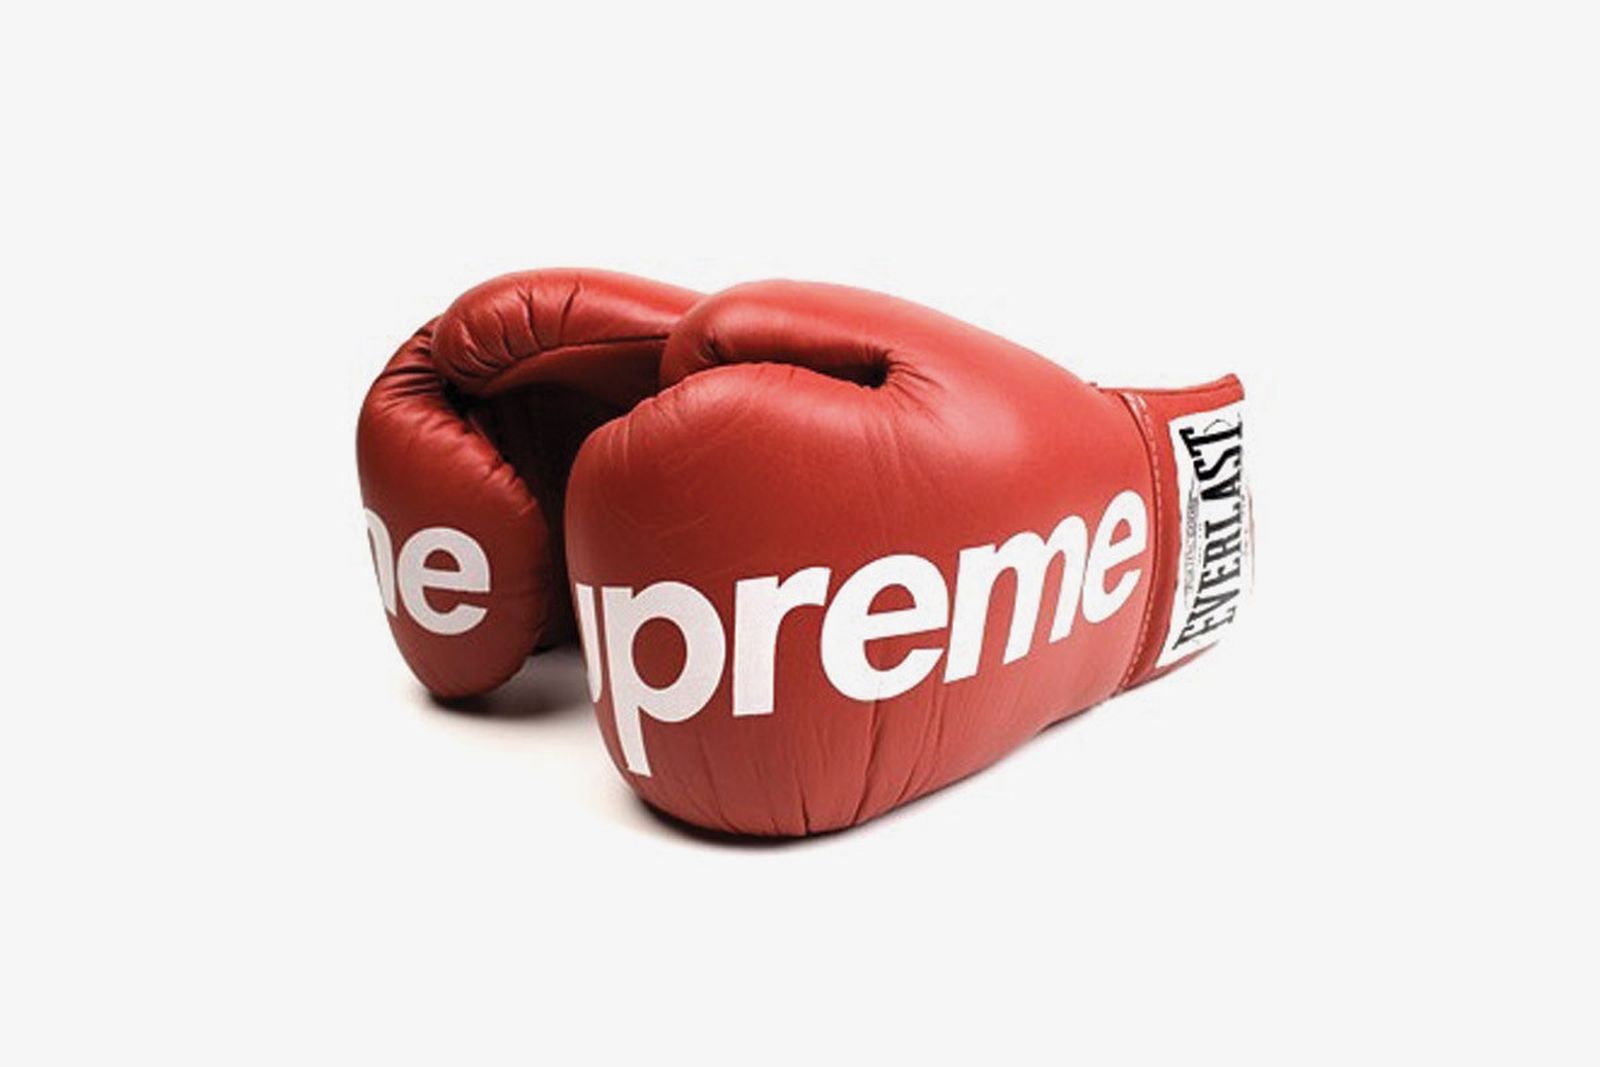 Supreme: The Greatest of All Time